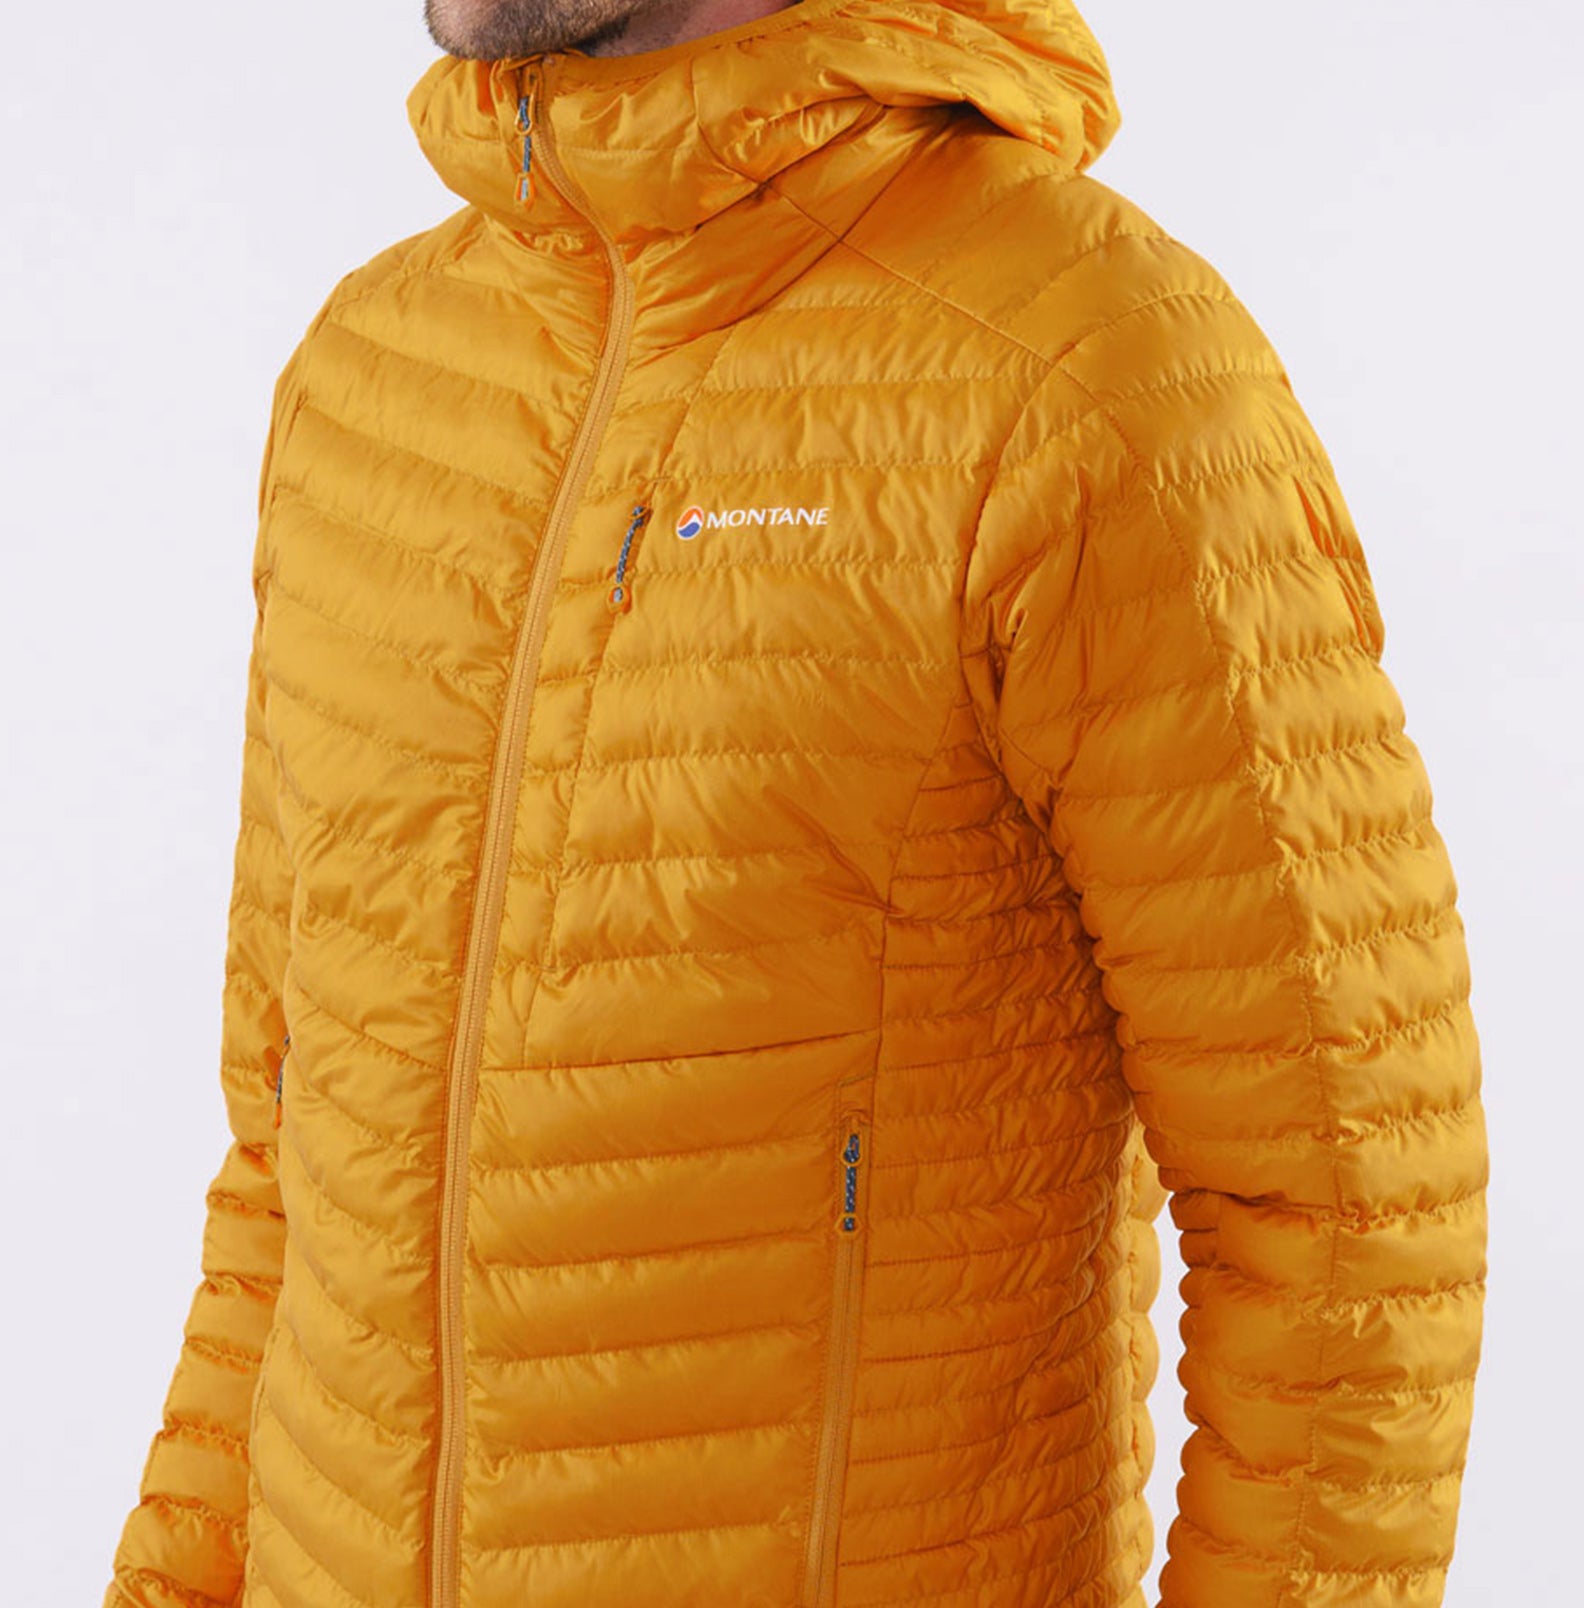 How to Wash a Down Jacket & Synthetic Insulation Jacket